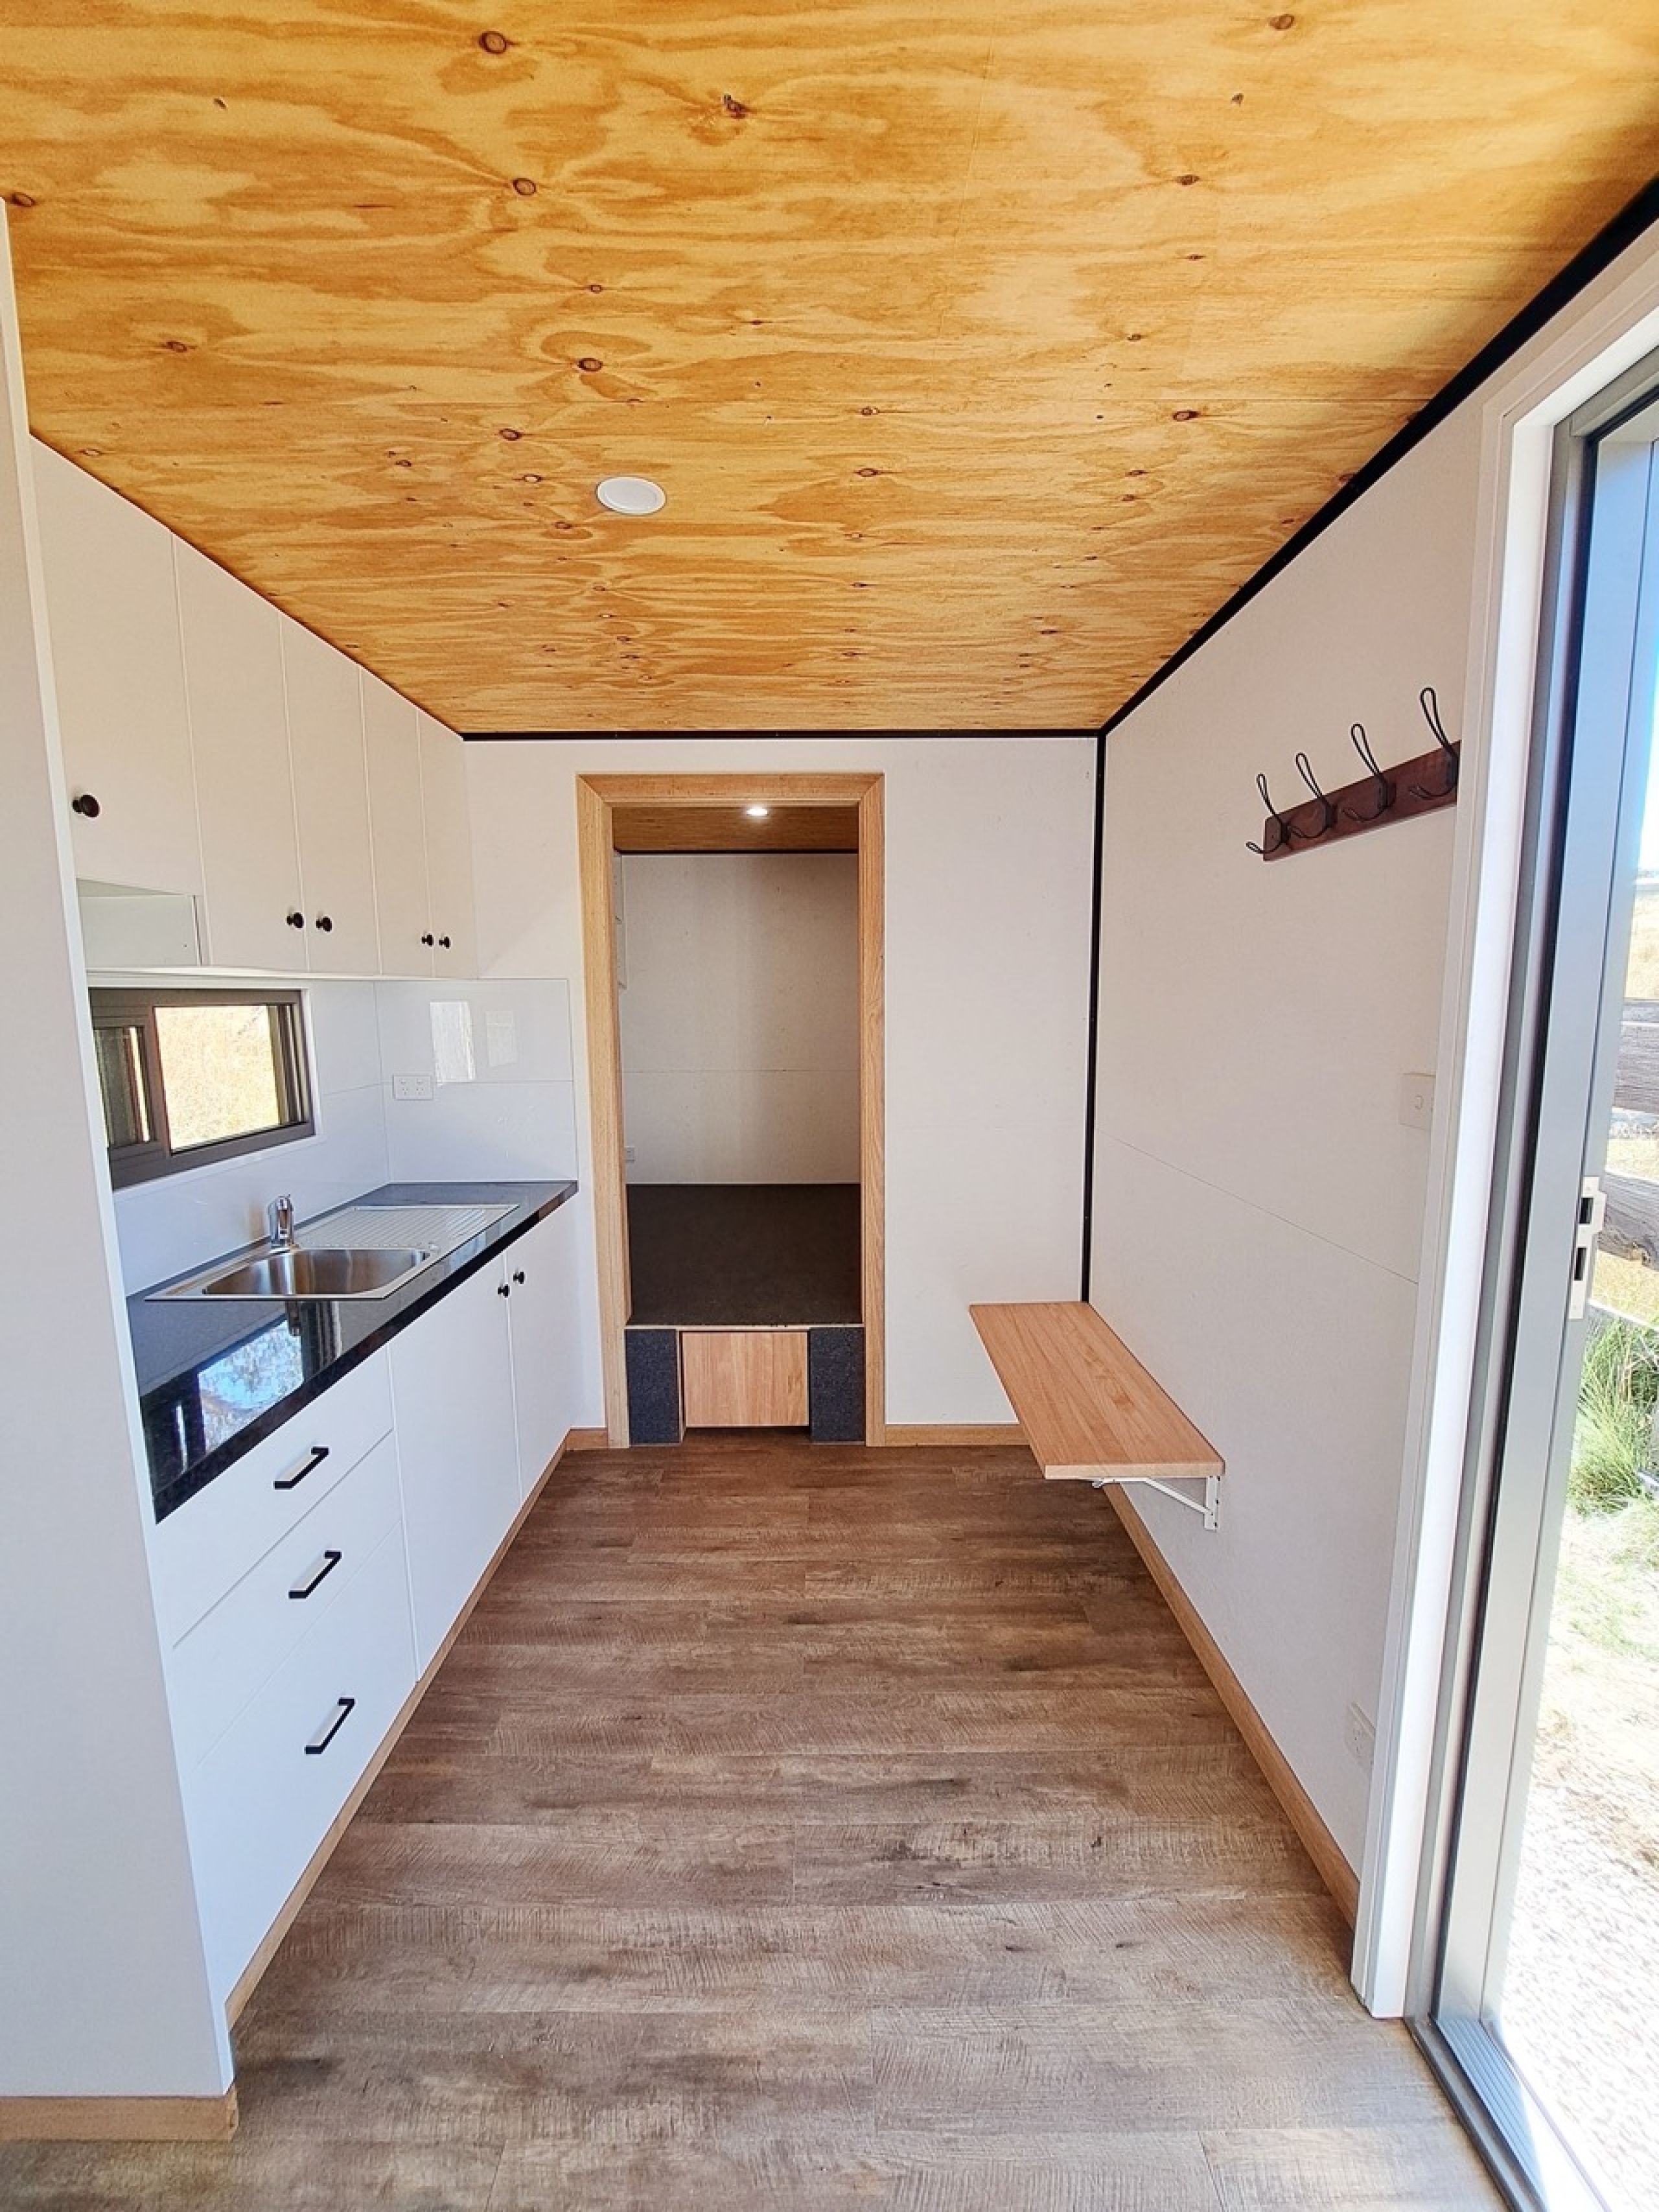 Live big in a small space with Canberra Container Homes